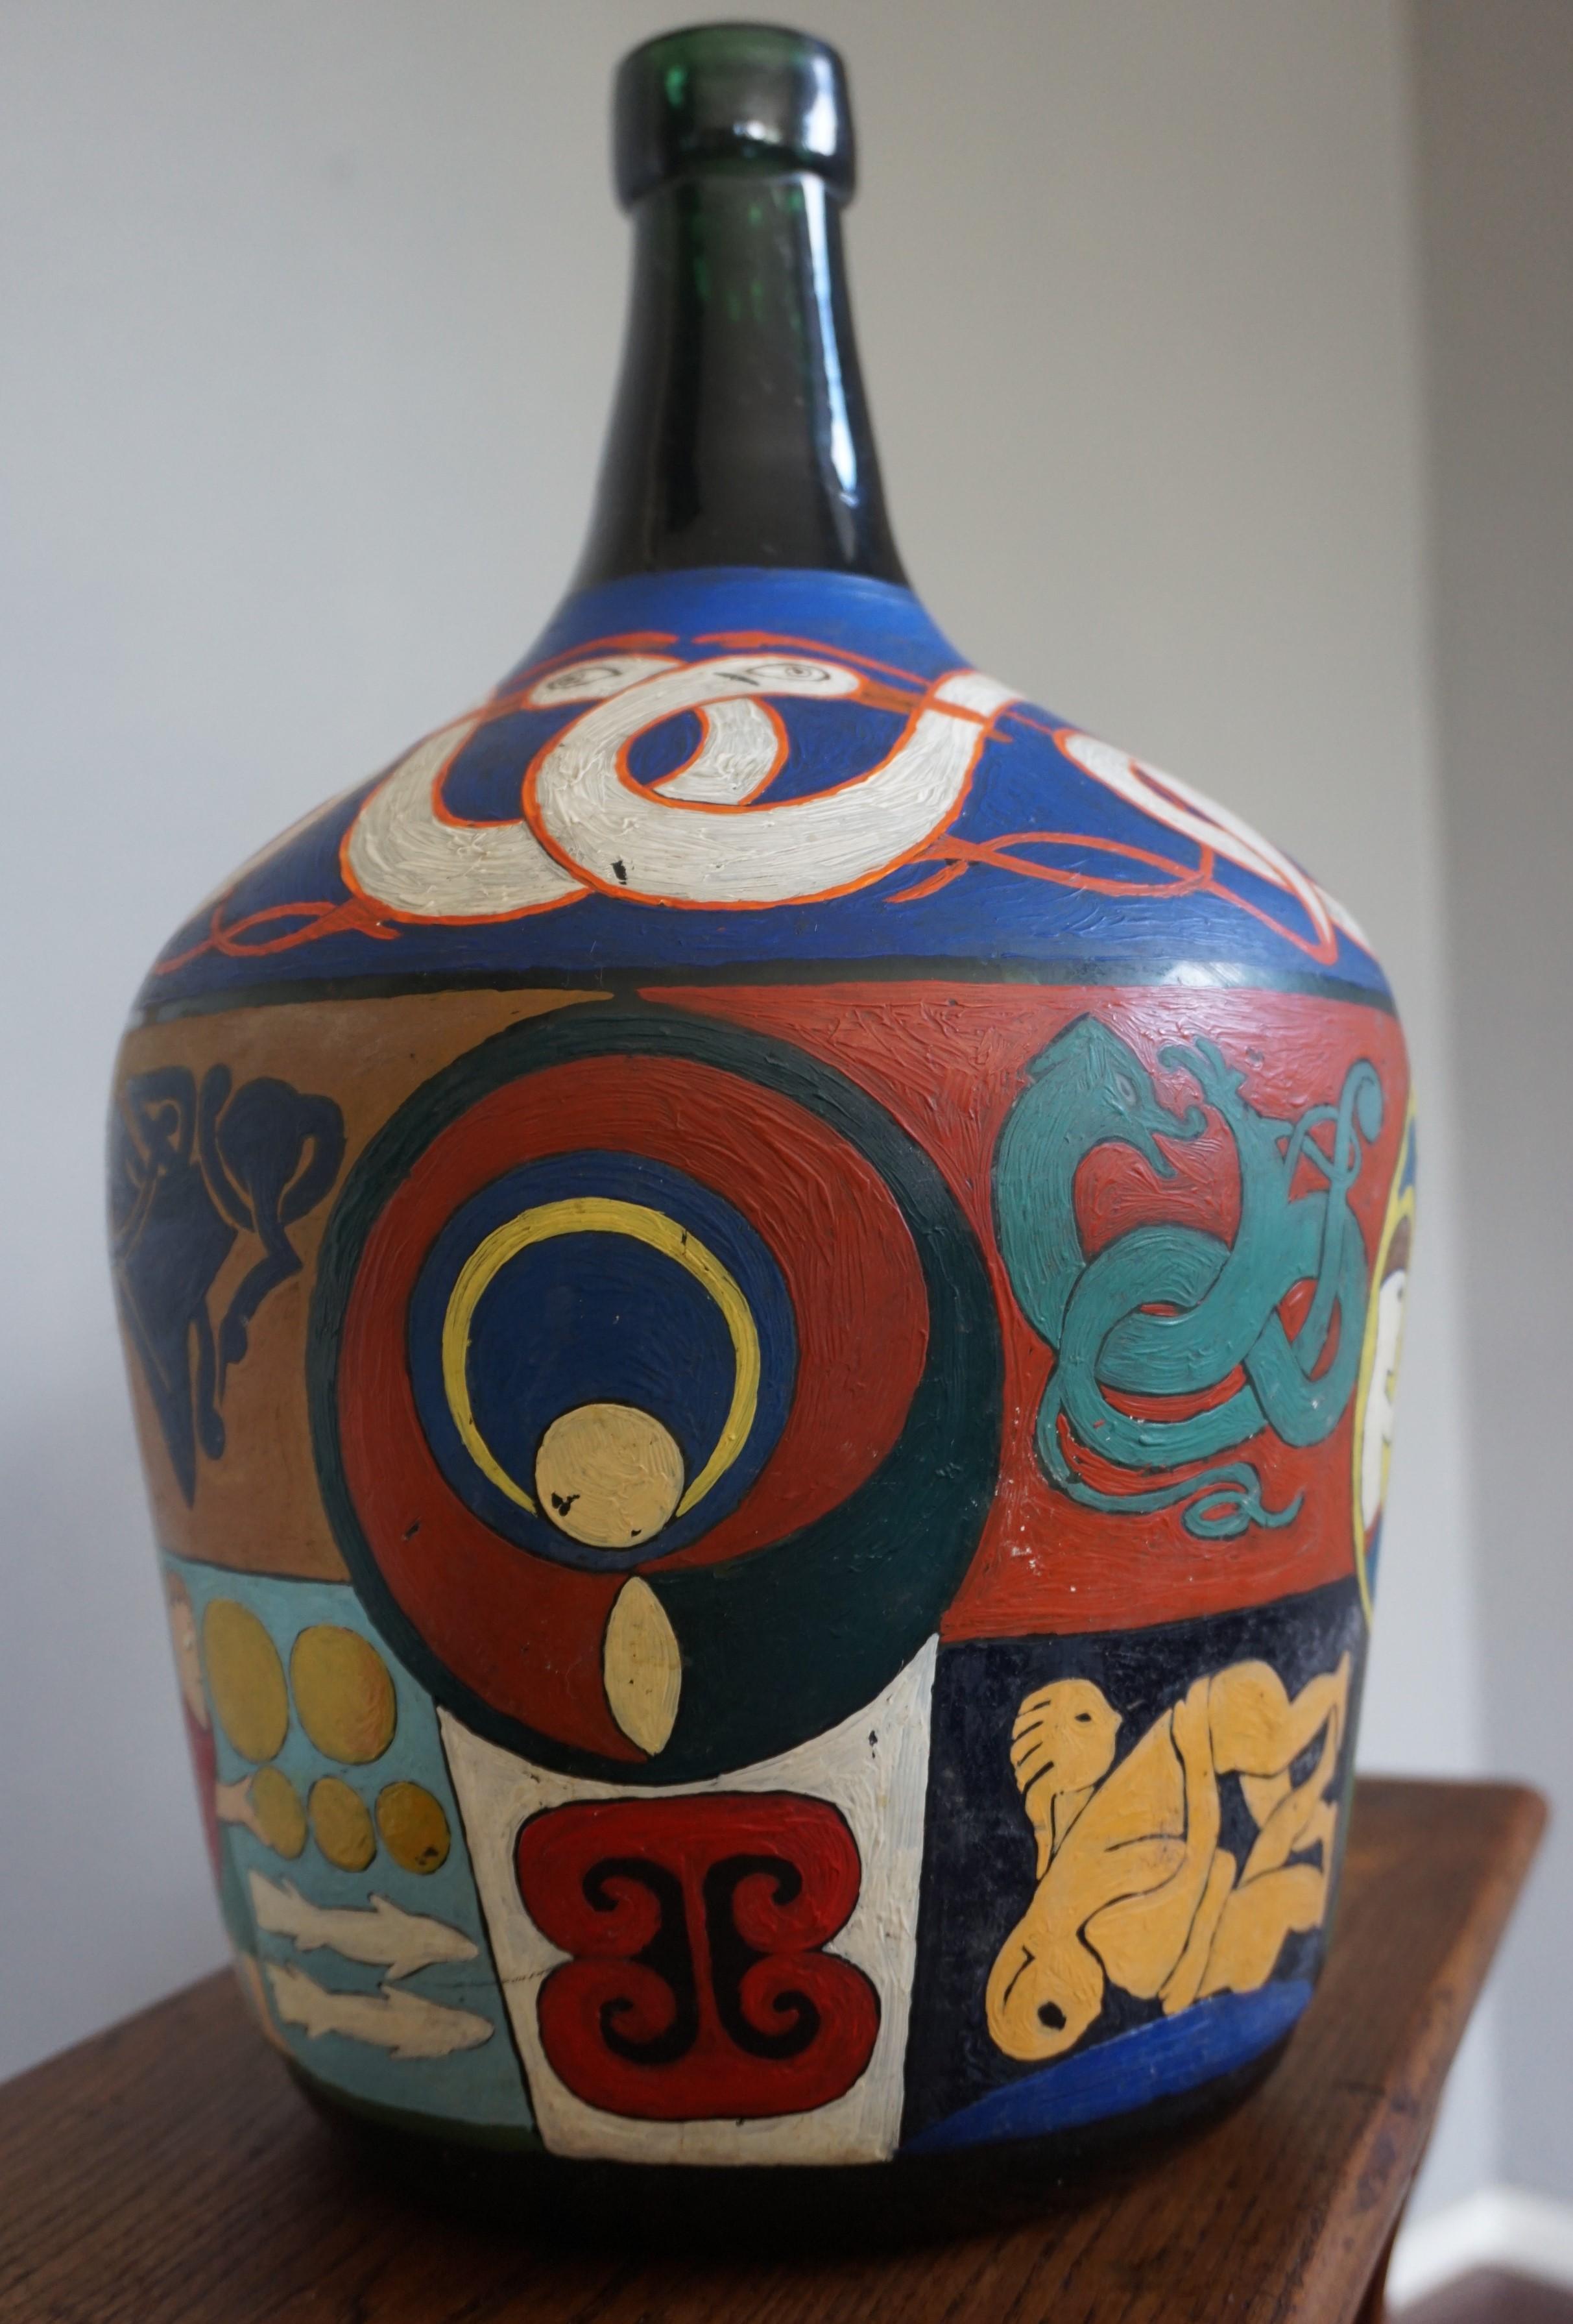 Rare and very artistic Folk Art.

This artistic, vibrant, decorative and meaningful work of Folk Art is a real eyecatcher and a talking piece. We recently acquired this painted Folk Art bottle and three more of the same size (but with different